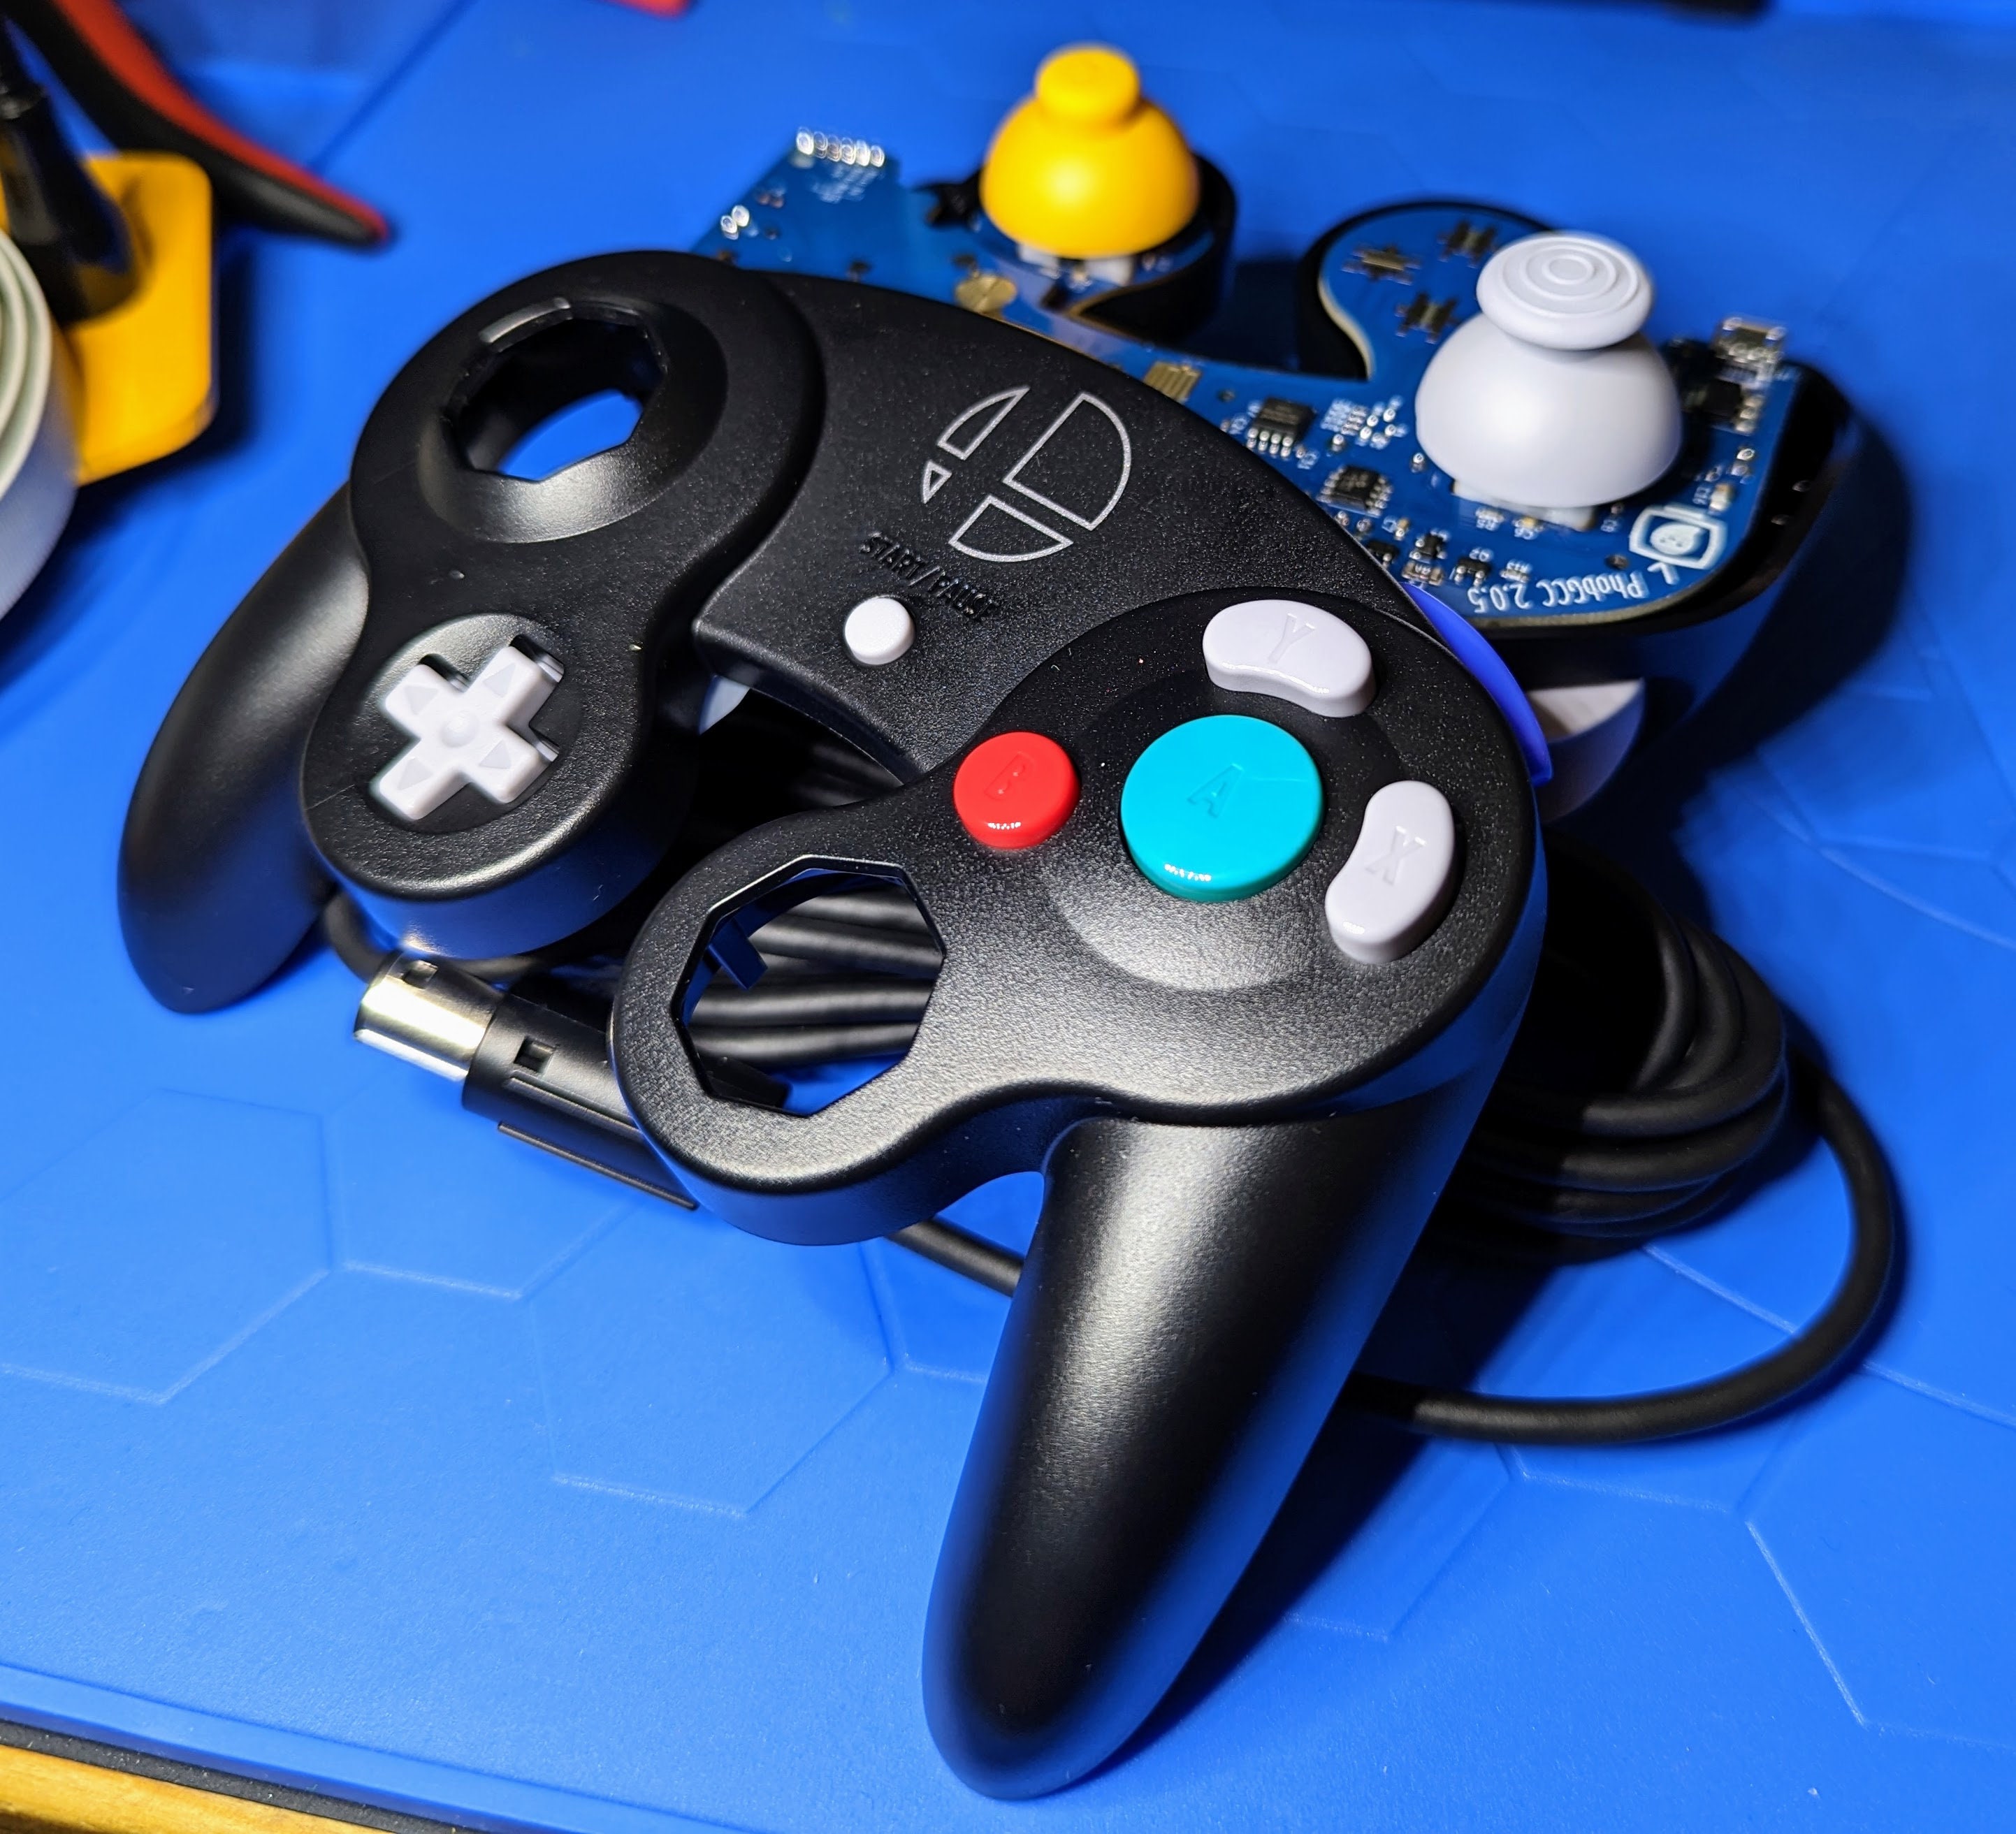 Phob 2.0 Gamecube Controller for Smash Bros. Melee & Ultimate